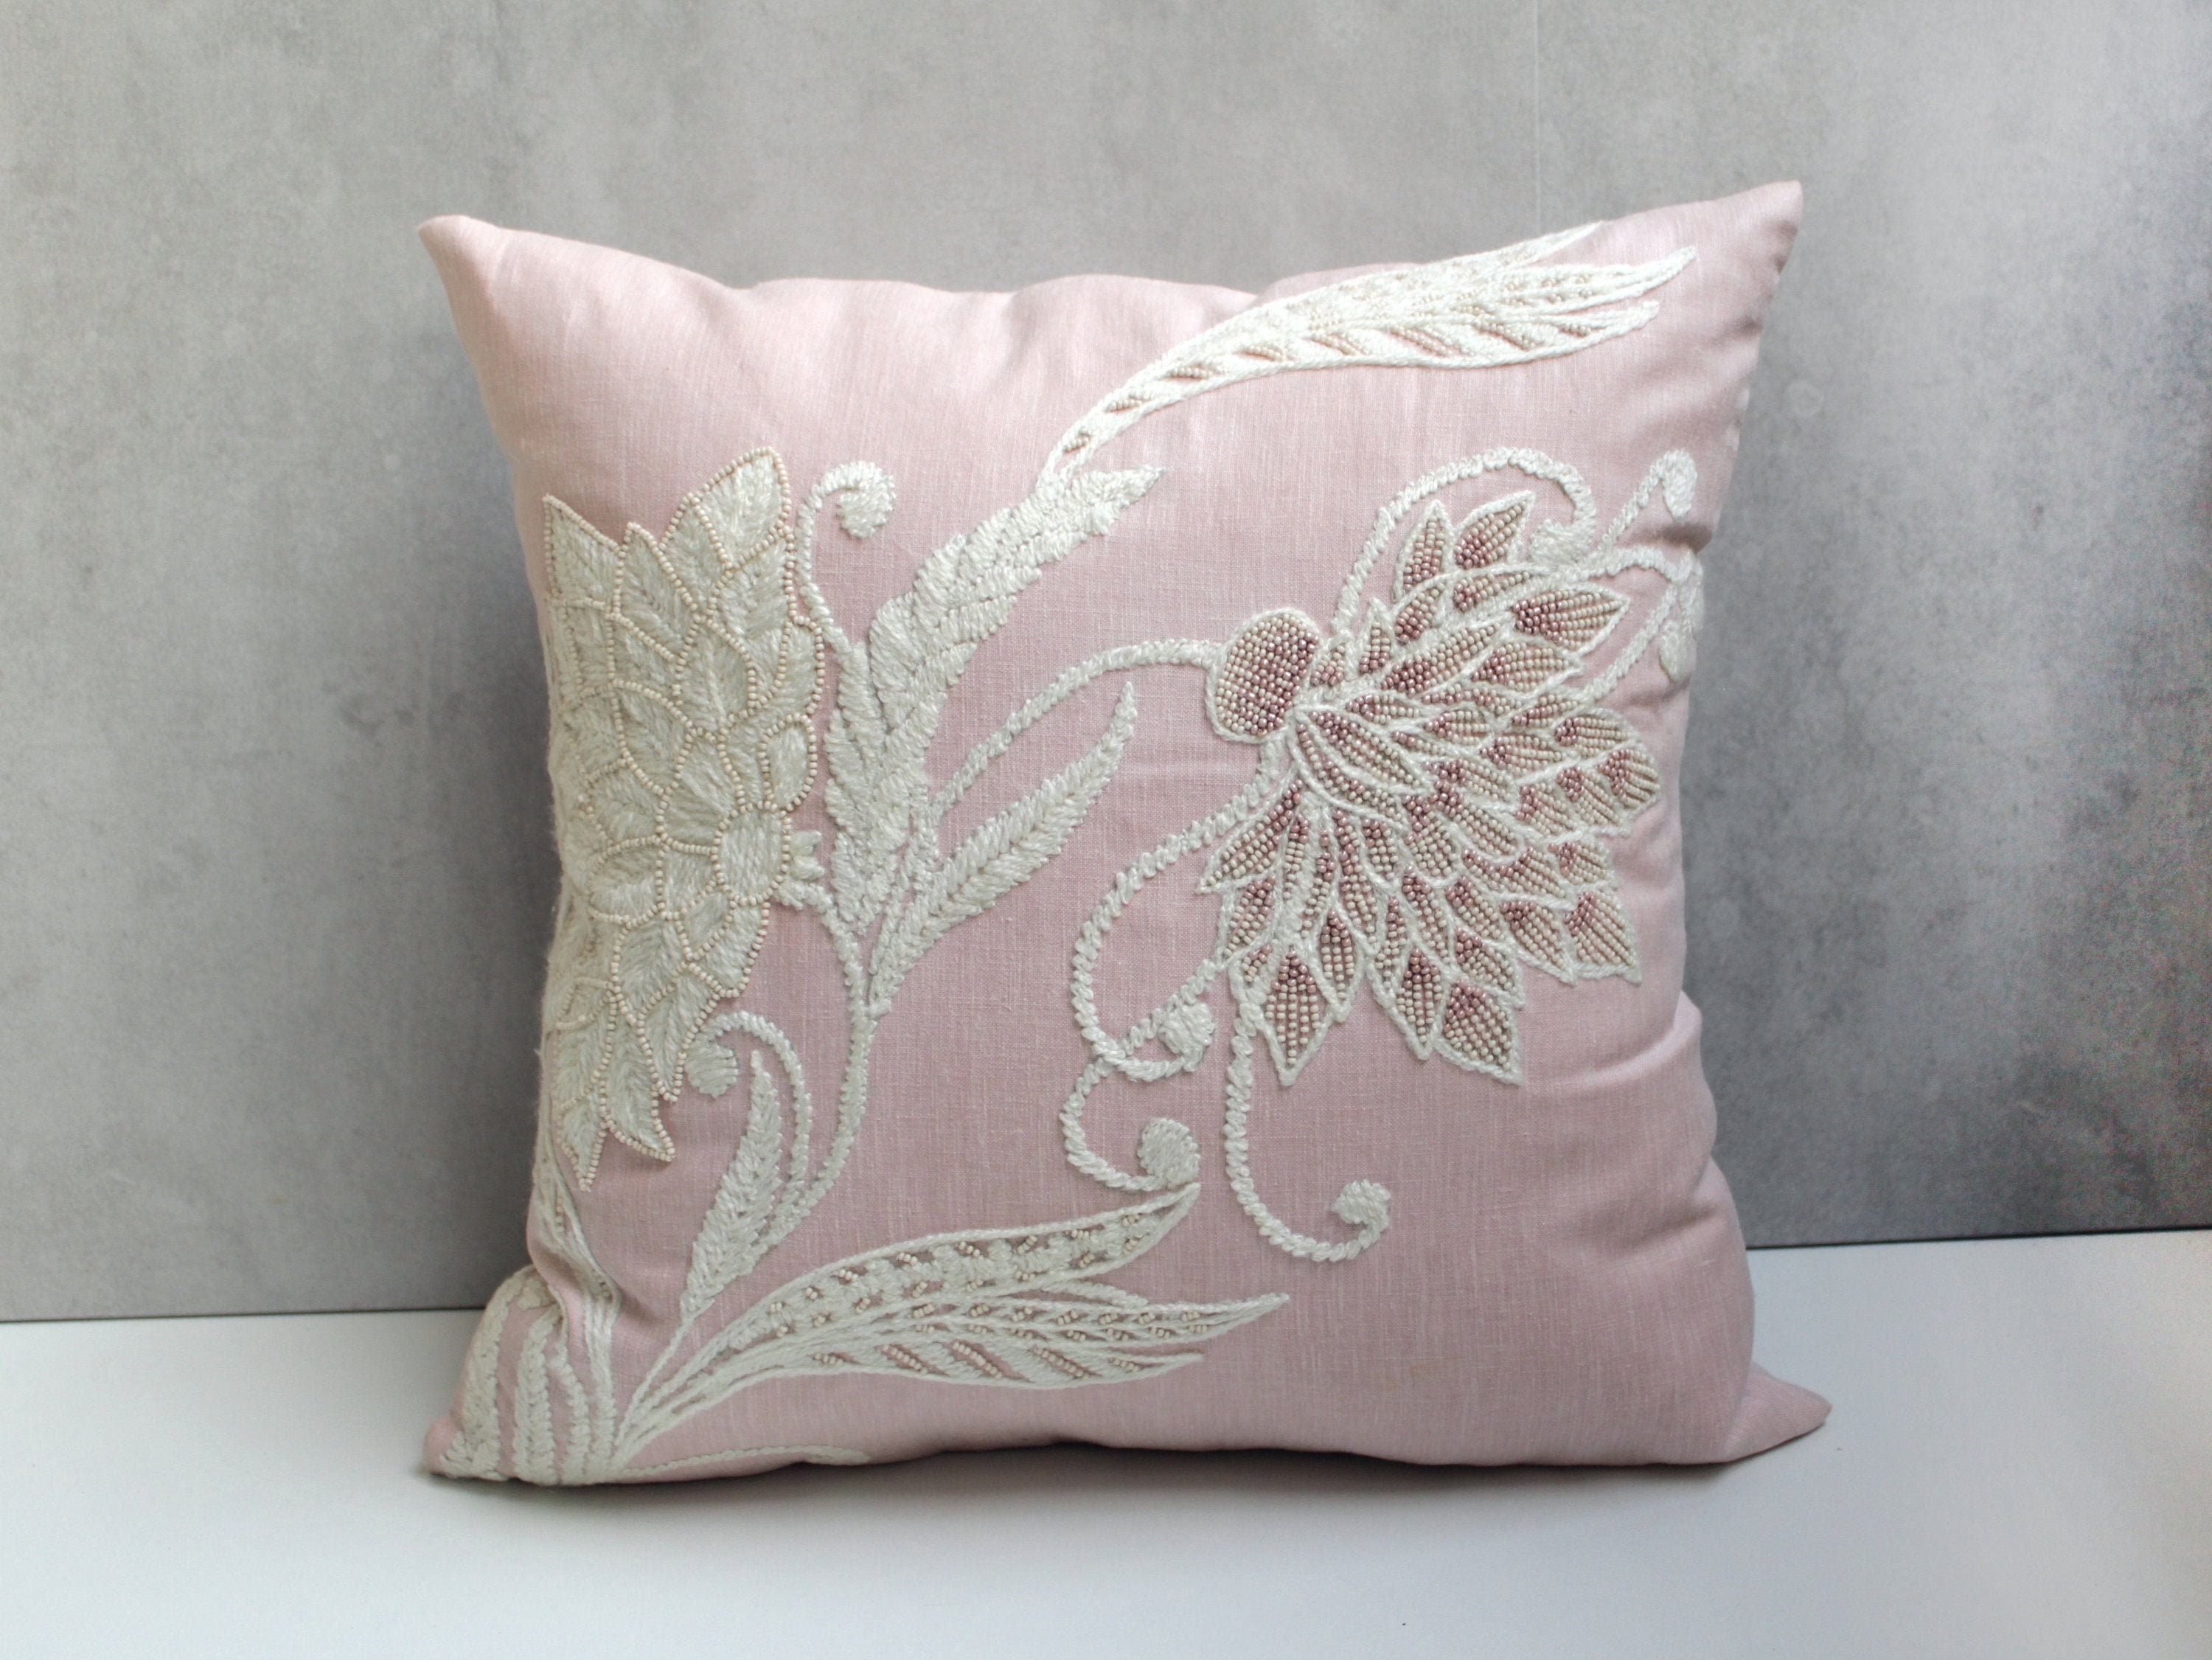 Pink Cotton Linen Blend Pillow Cover Wool Bead Work Luxury Contemporary Modern Throw Hand Embroidery Embellished Custom Bmcc156